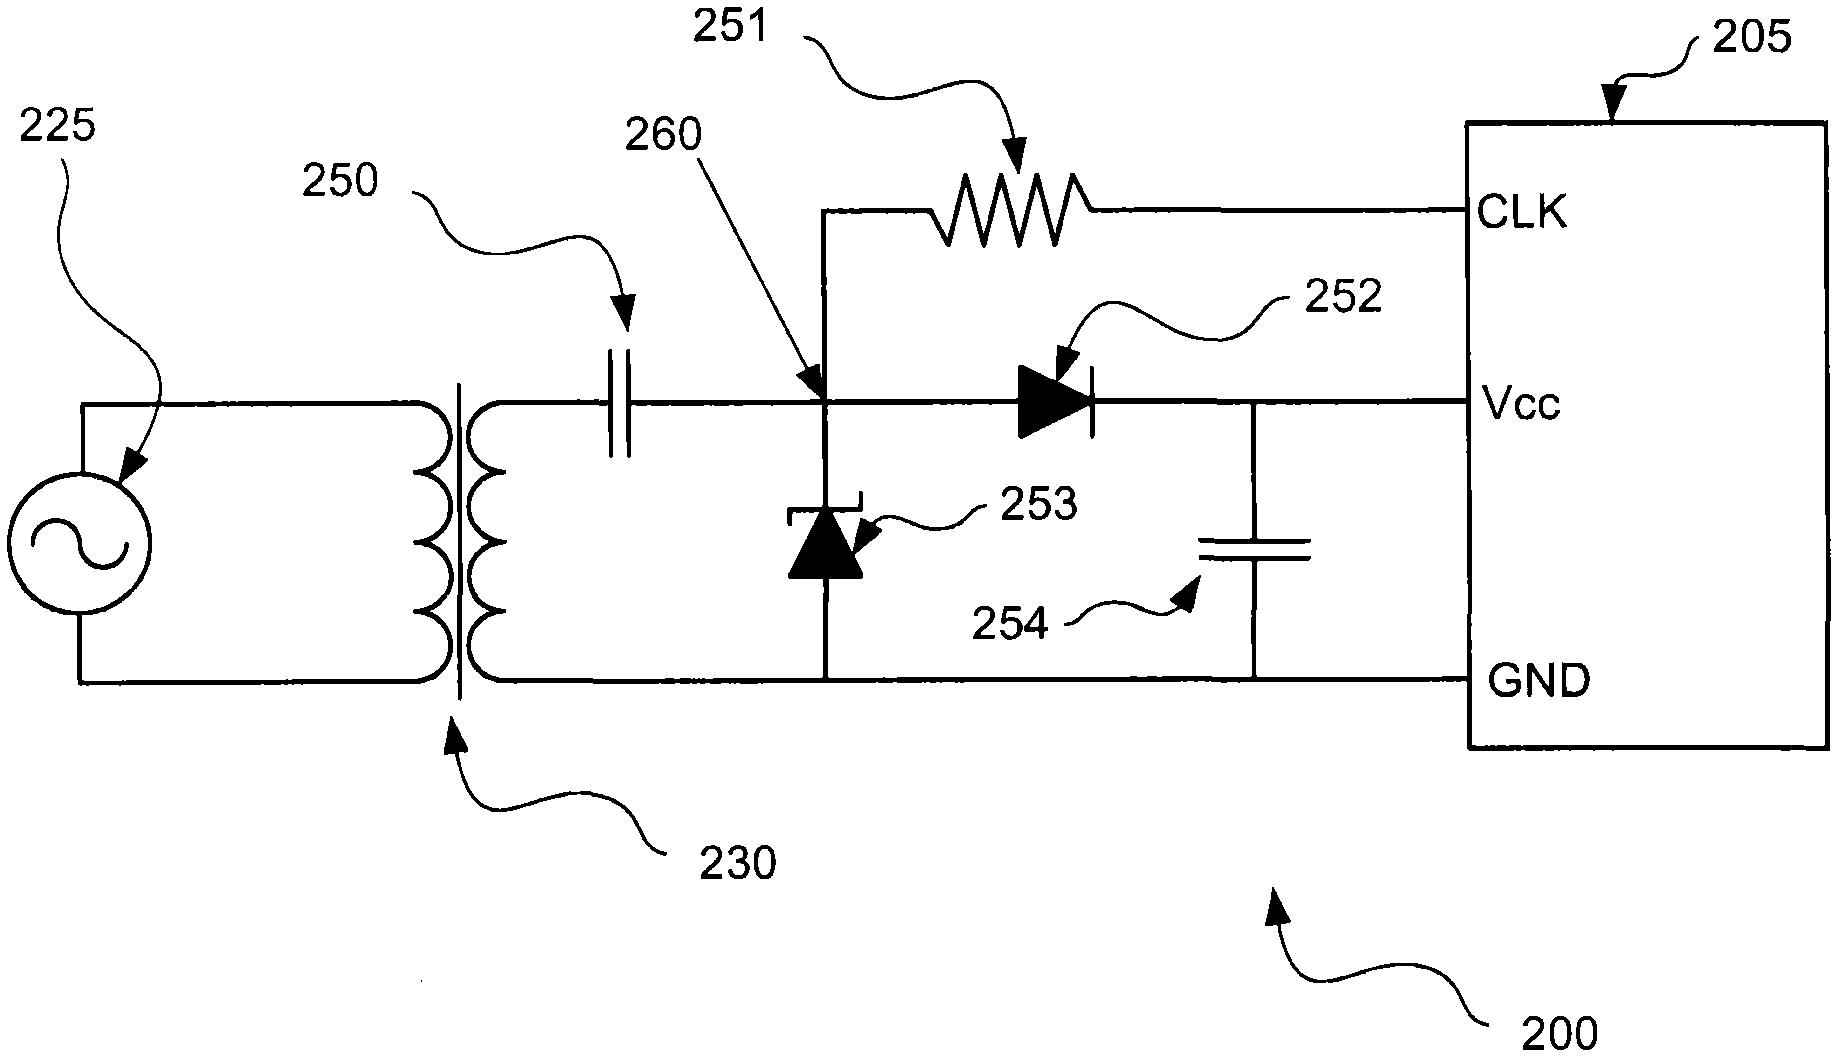 Combined power and timing signals for equipment